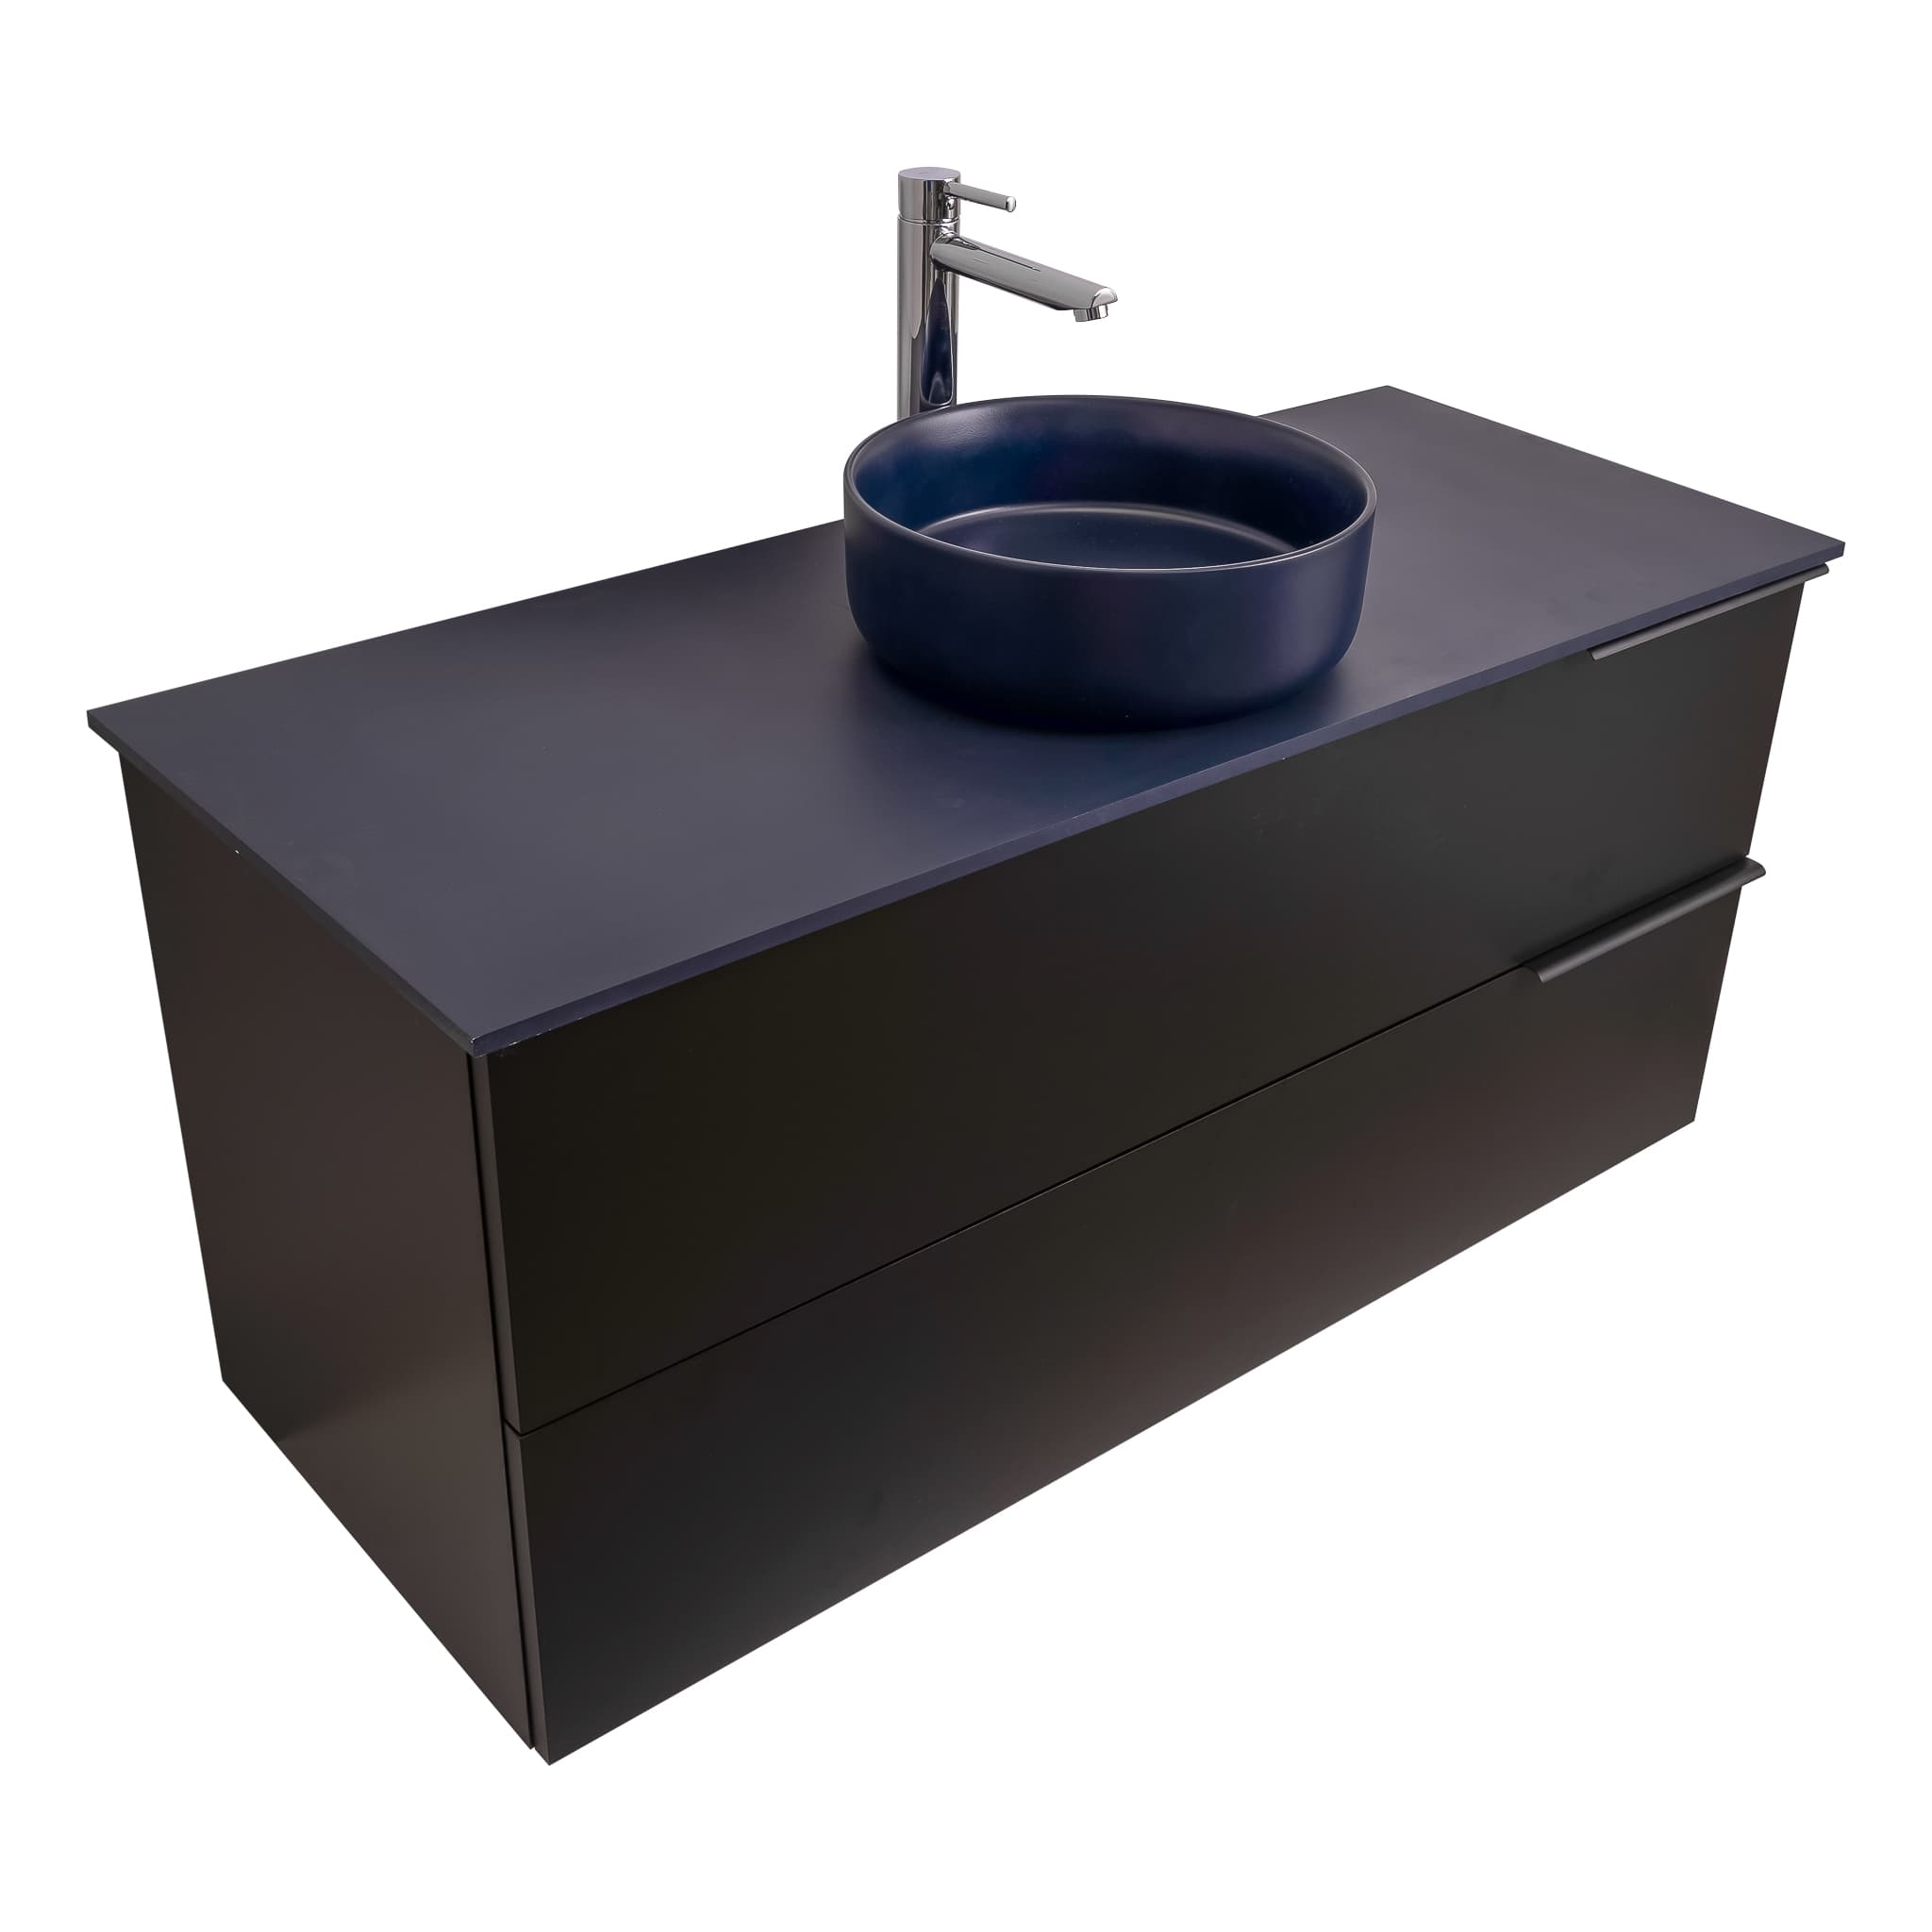 Mallorca 47.5 Matte Black Cabinet, Ares Navy Blue Top And Ares Navy Blue Ceramic Basin, Wall Mounted Modern Vanity Set